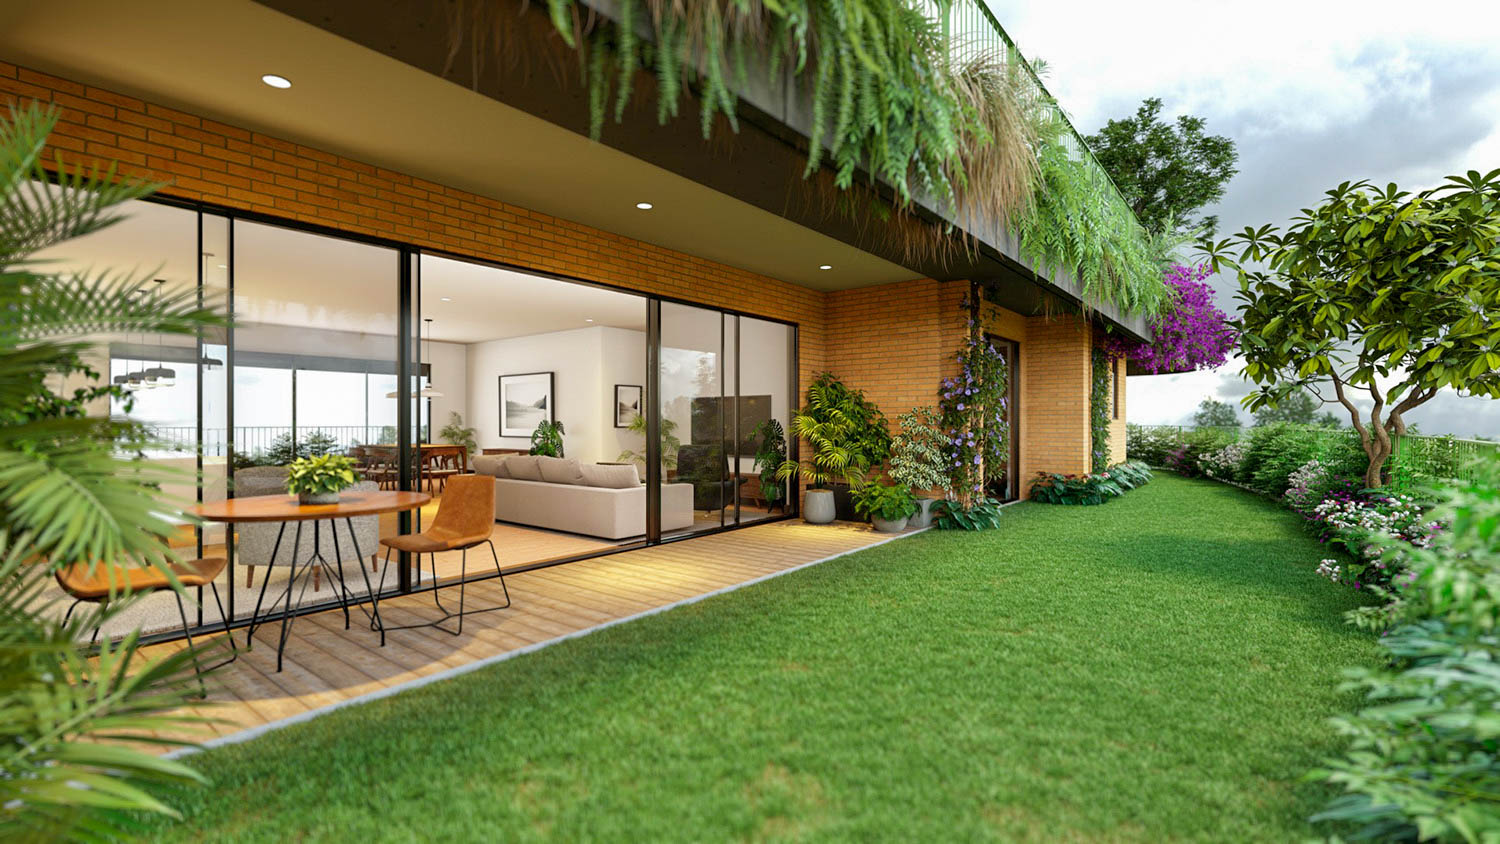 Terrace gardens can add vibrancy, serenity and healthy living to ...